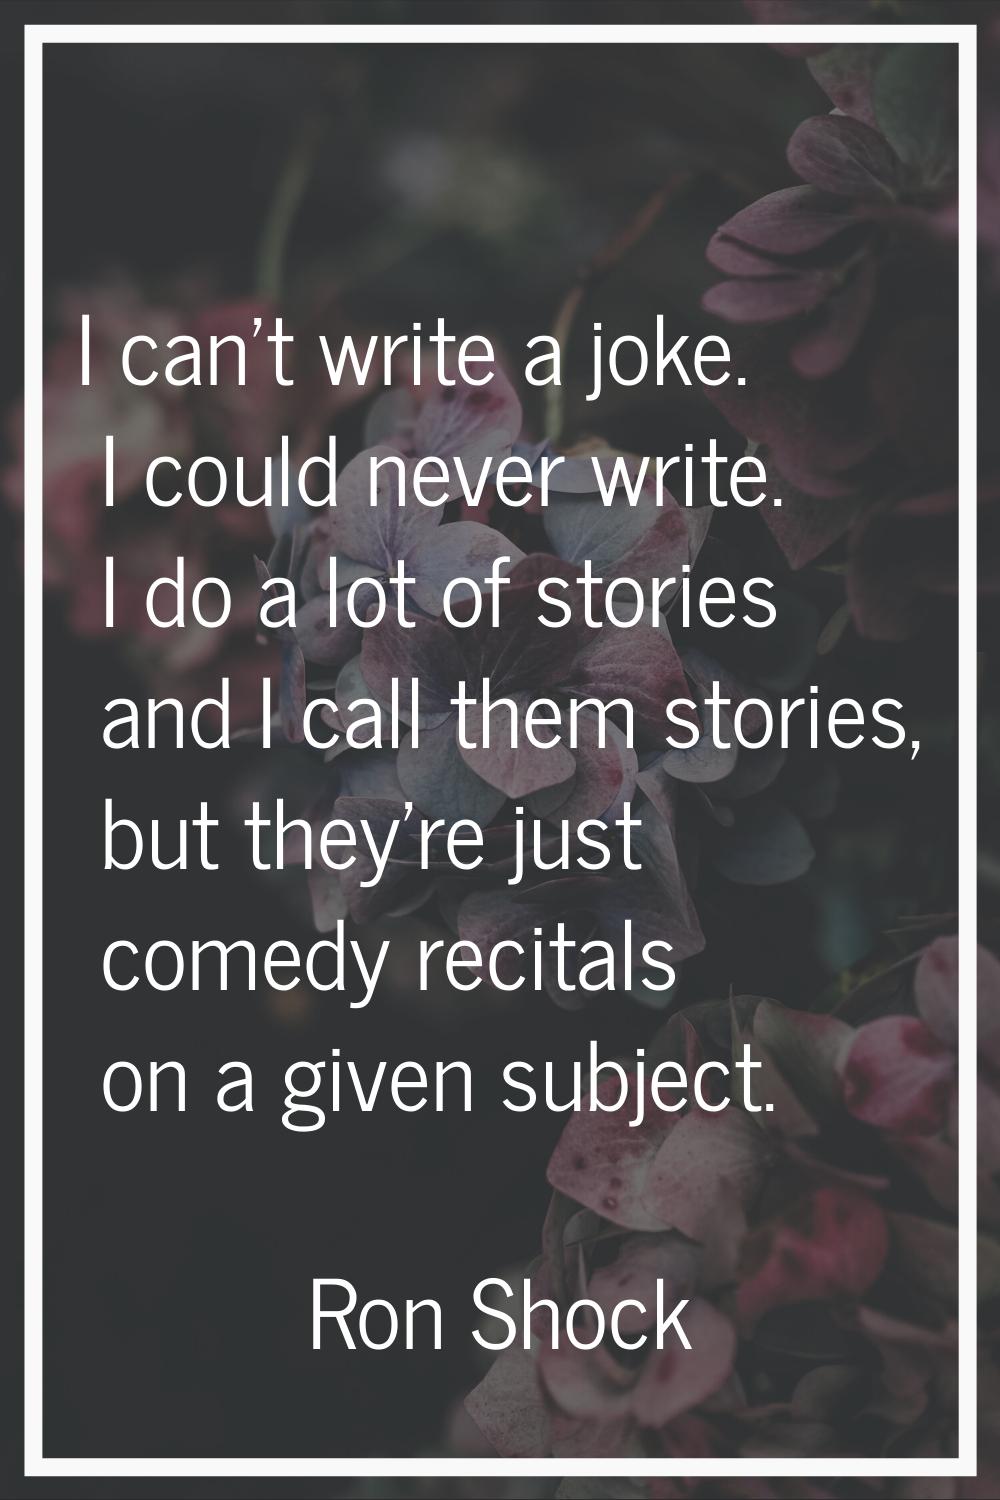 I can't write a joke. I could never write. I do a lot of stories and I call them stories, but they'